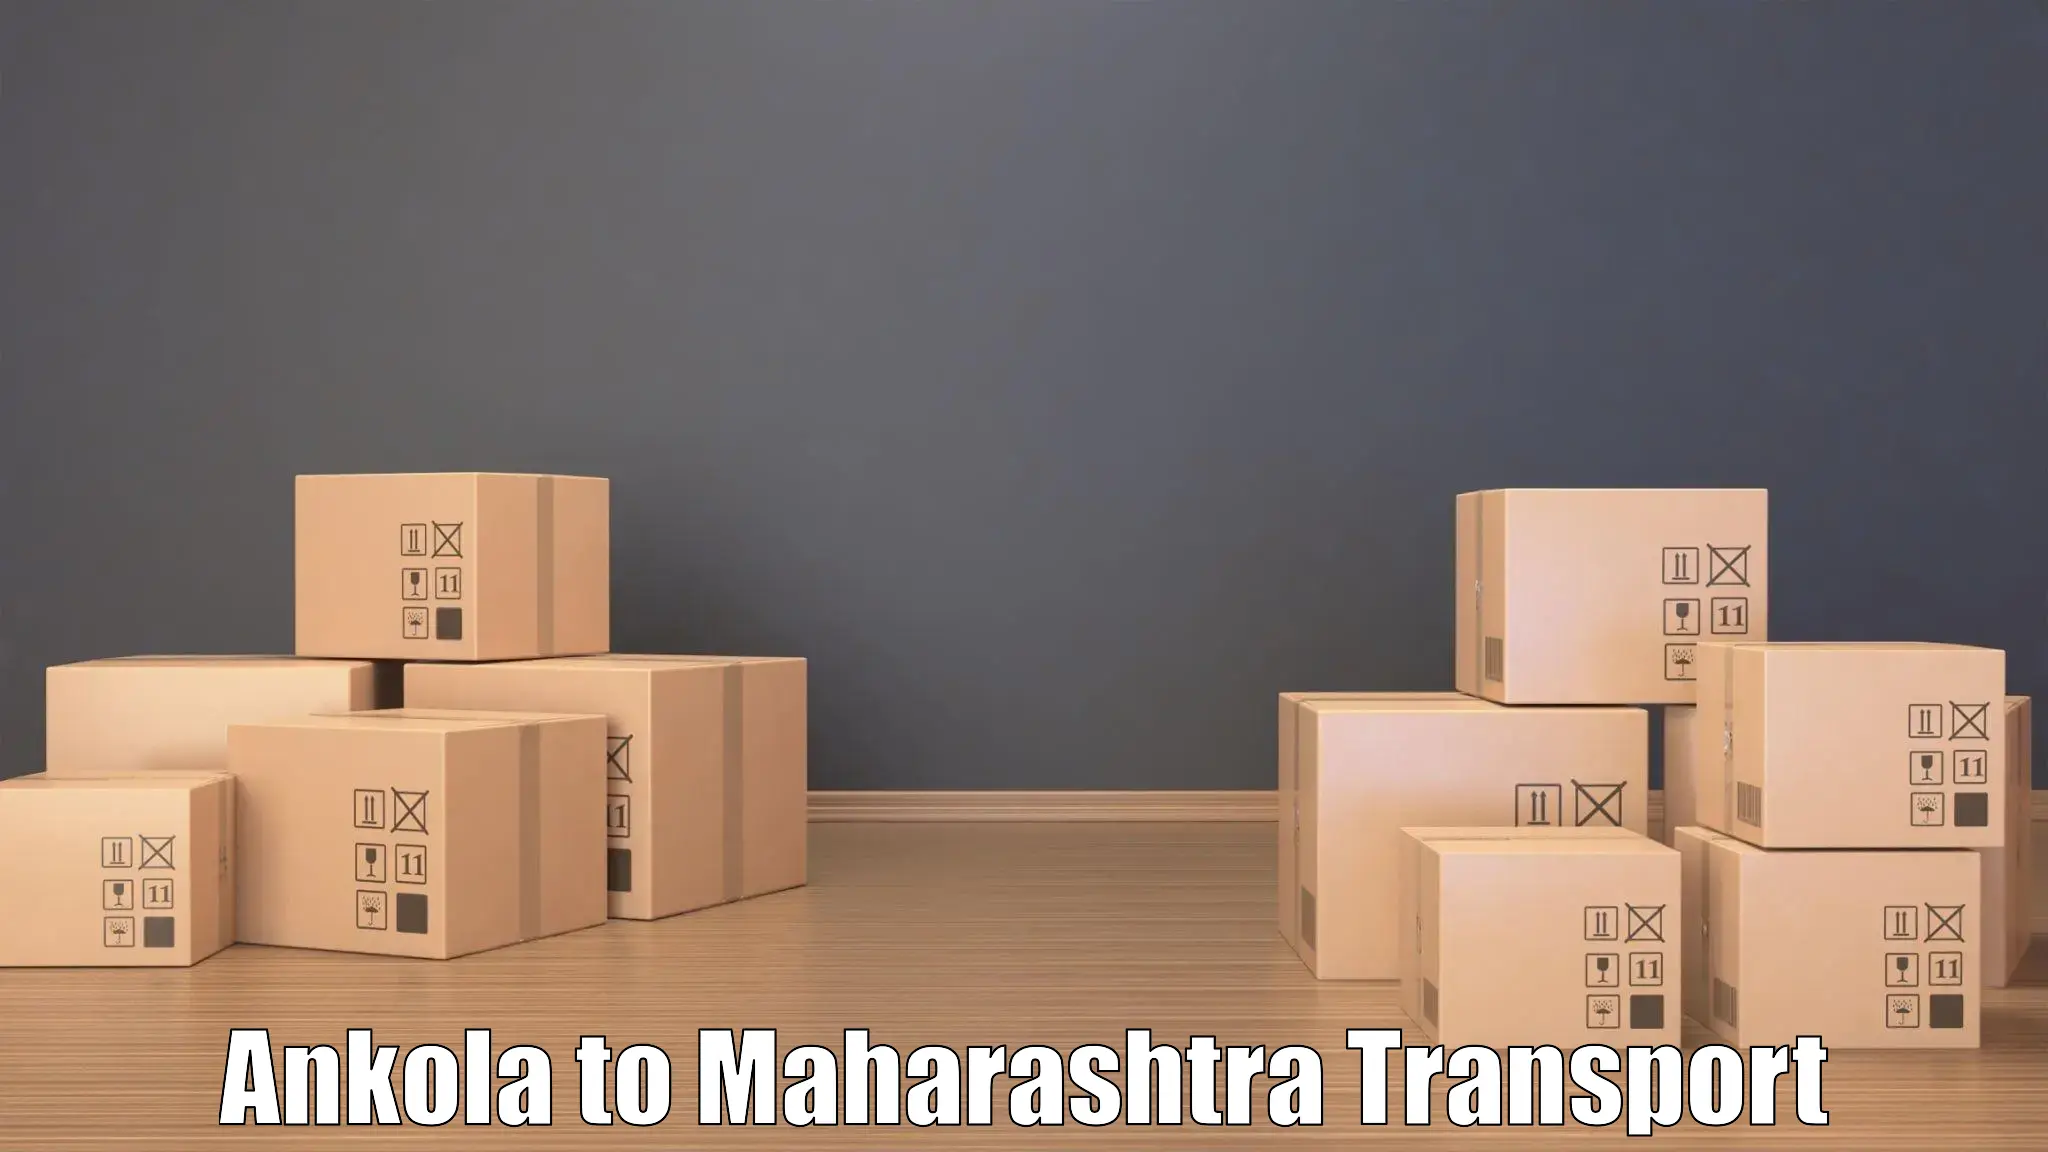 Part load transport service in India in Ankola to Nagpur